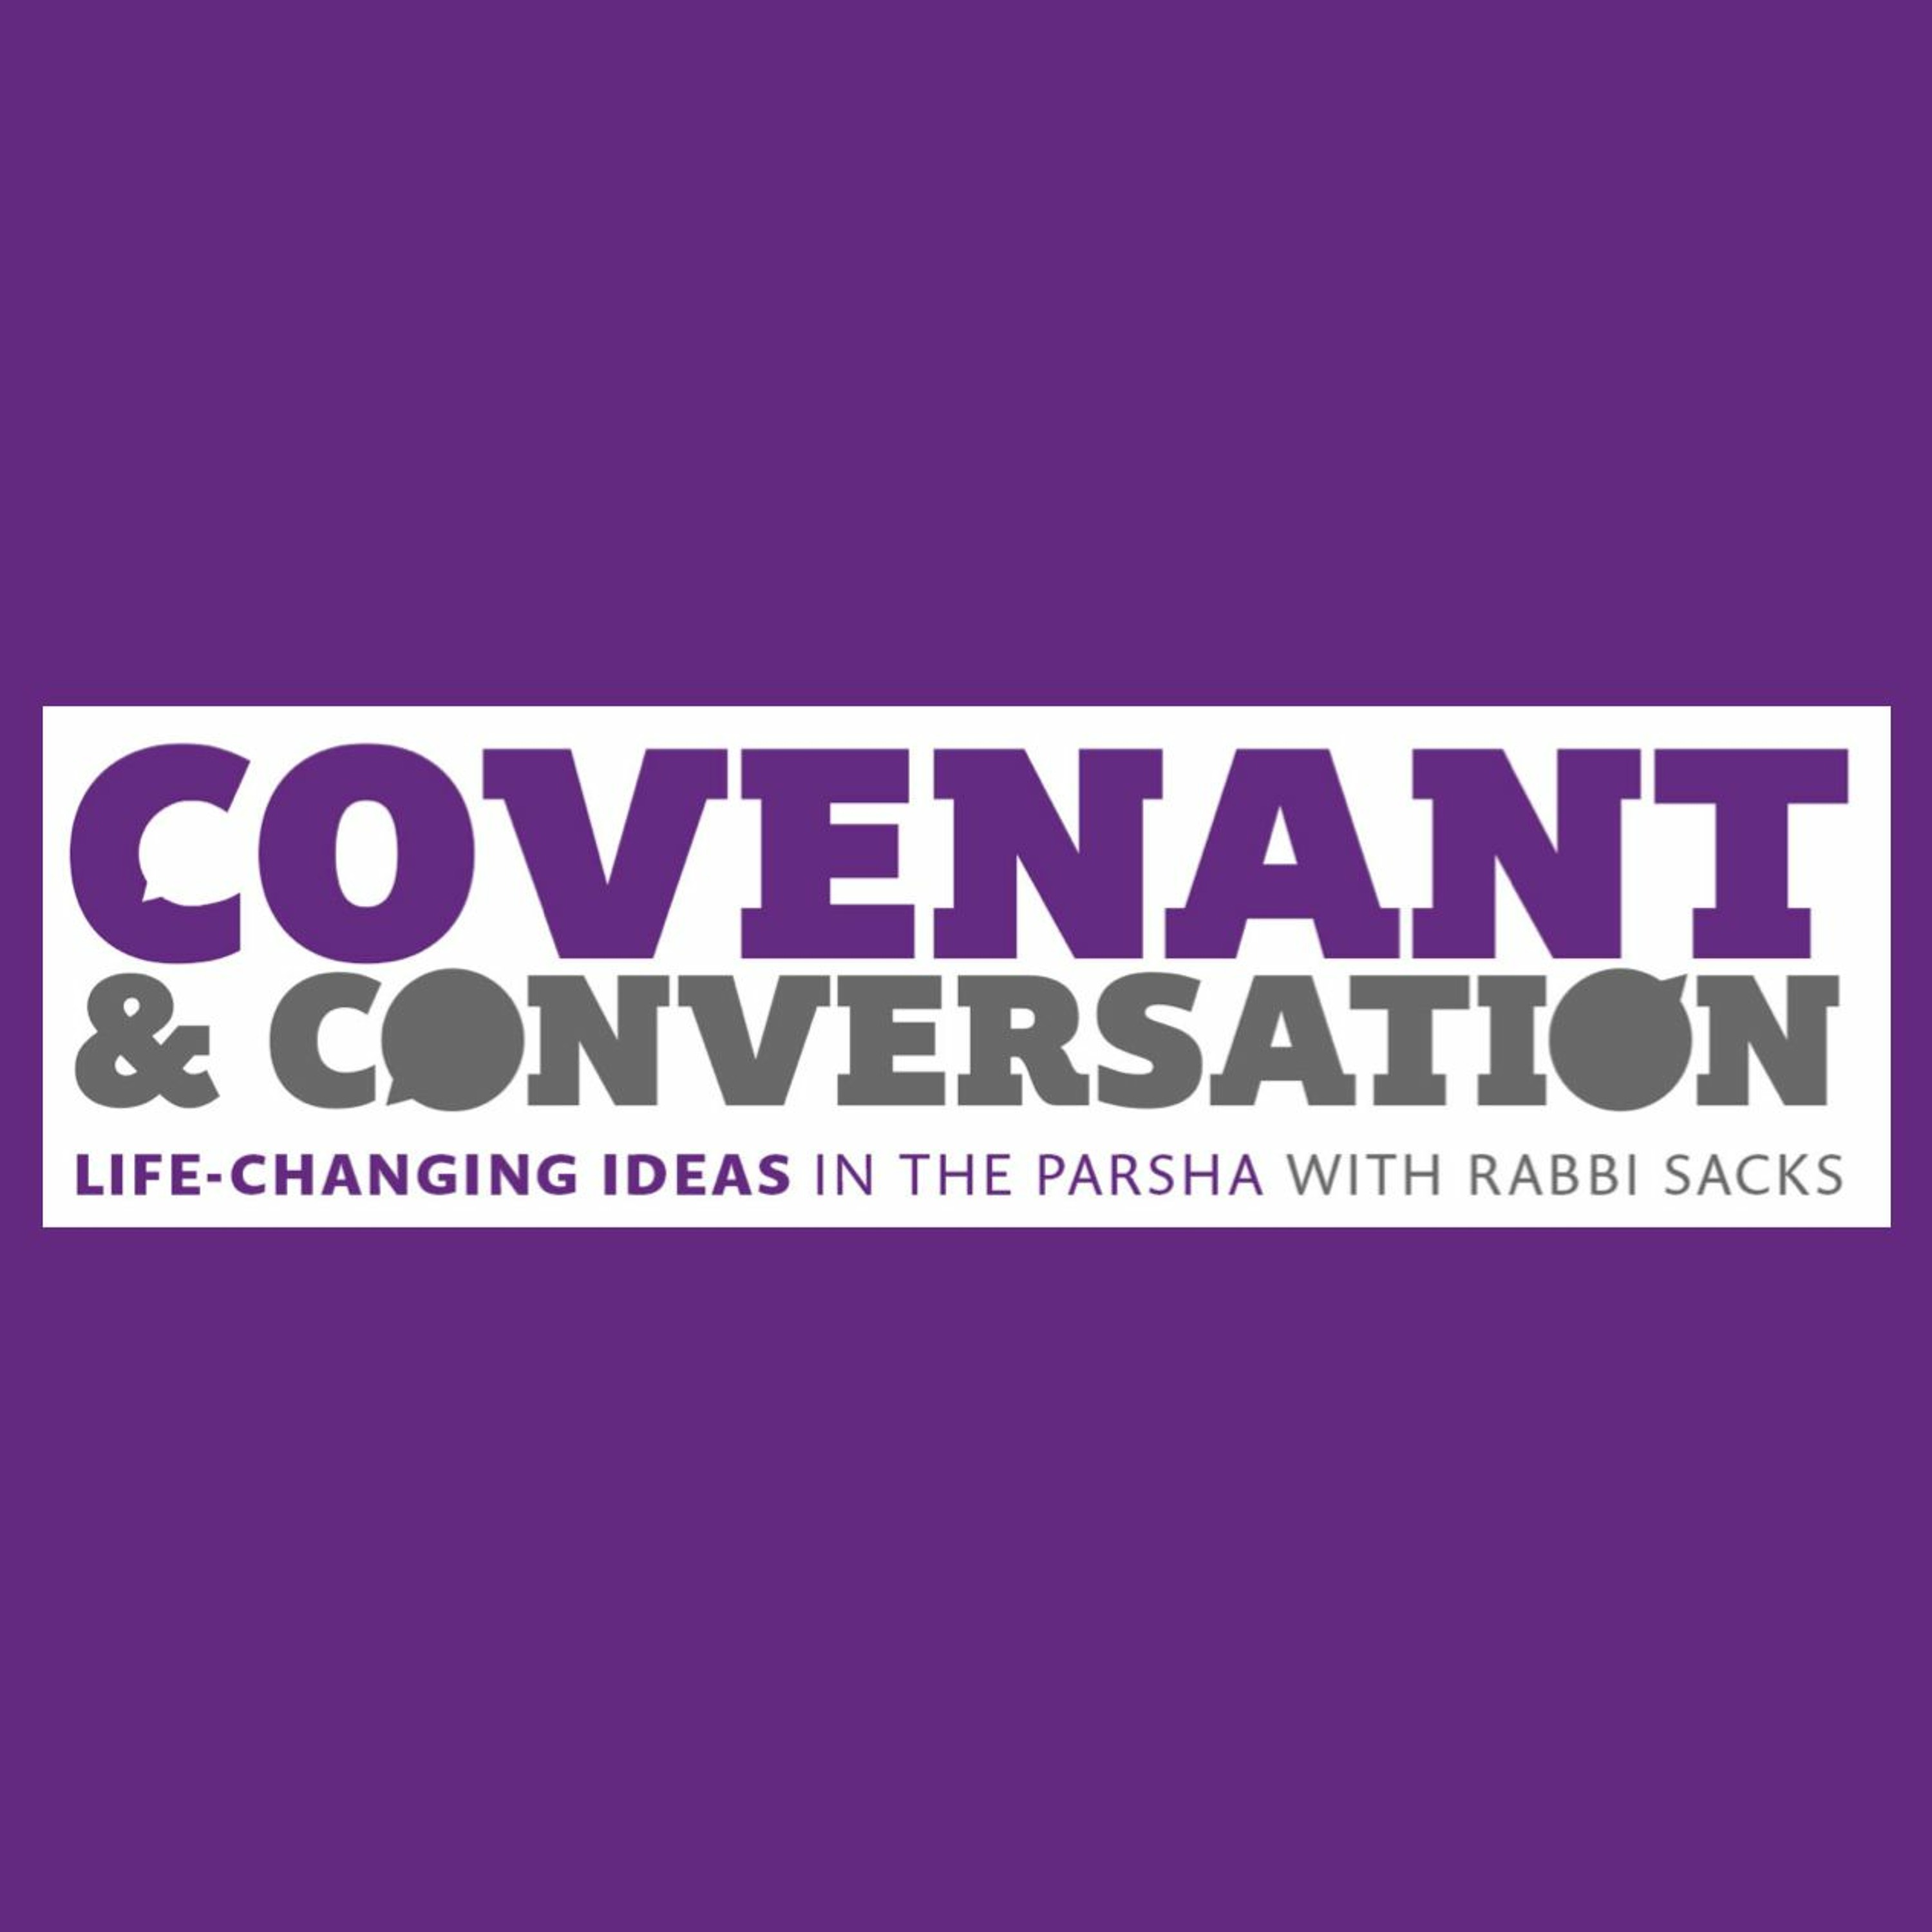 Judaism’s Life-Changing Ideas | An Introduction to Covenant & Conversation 5778